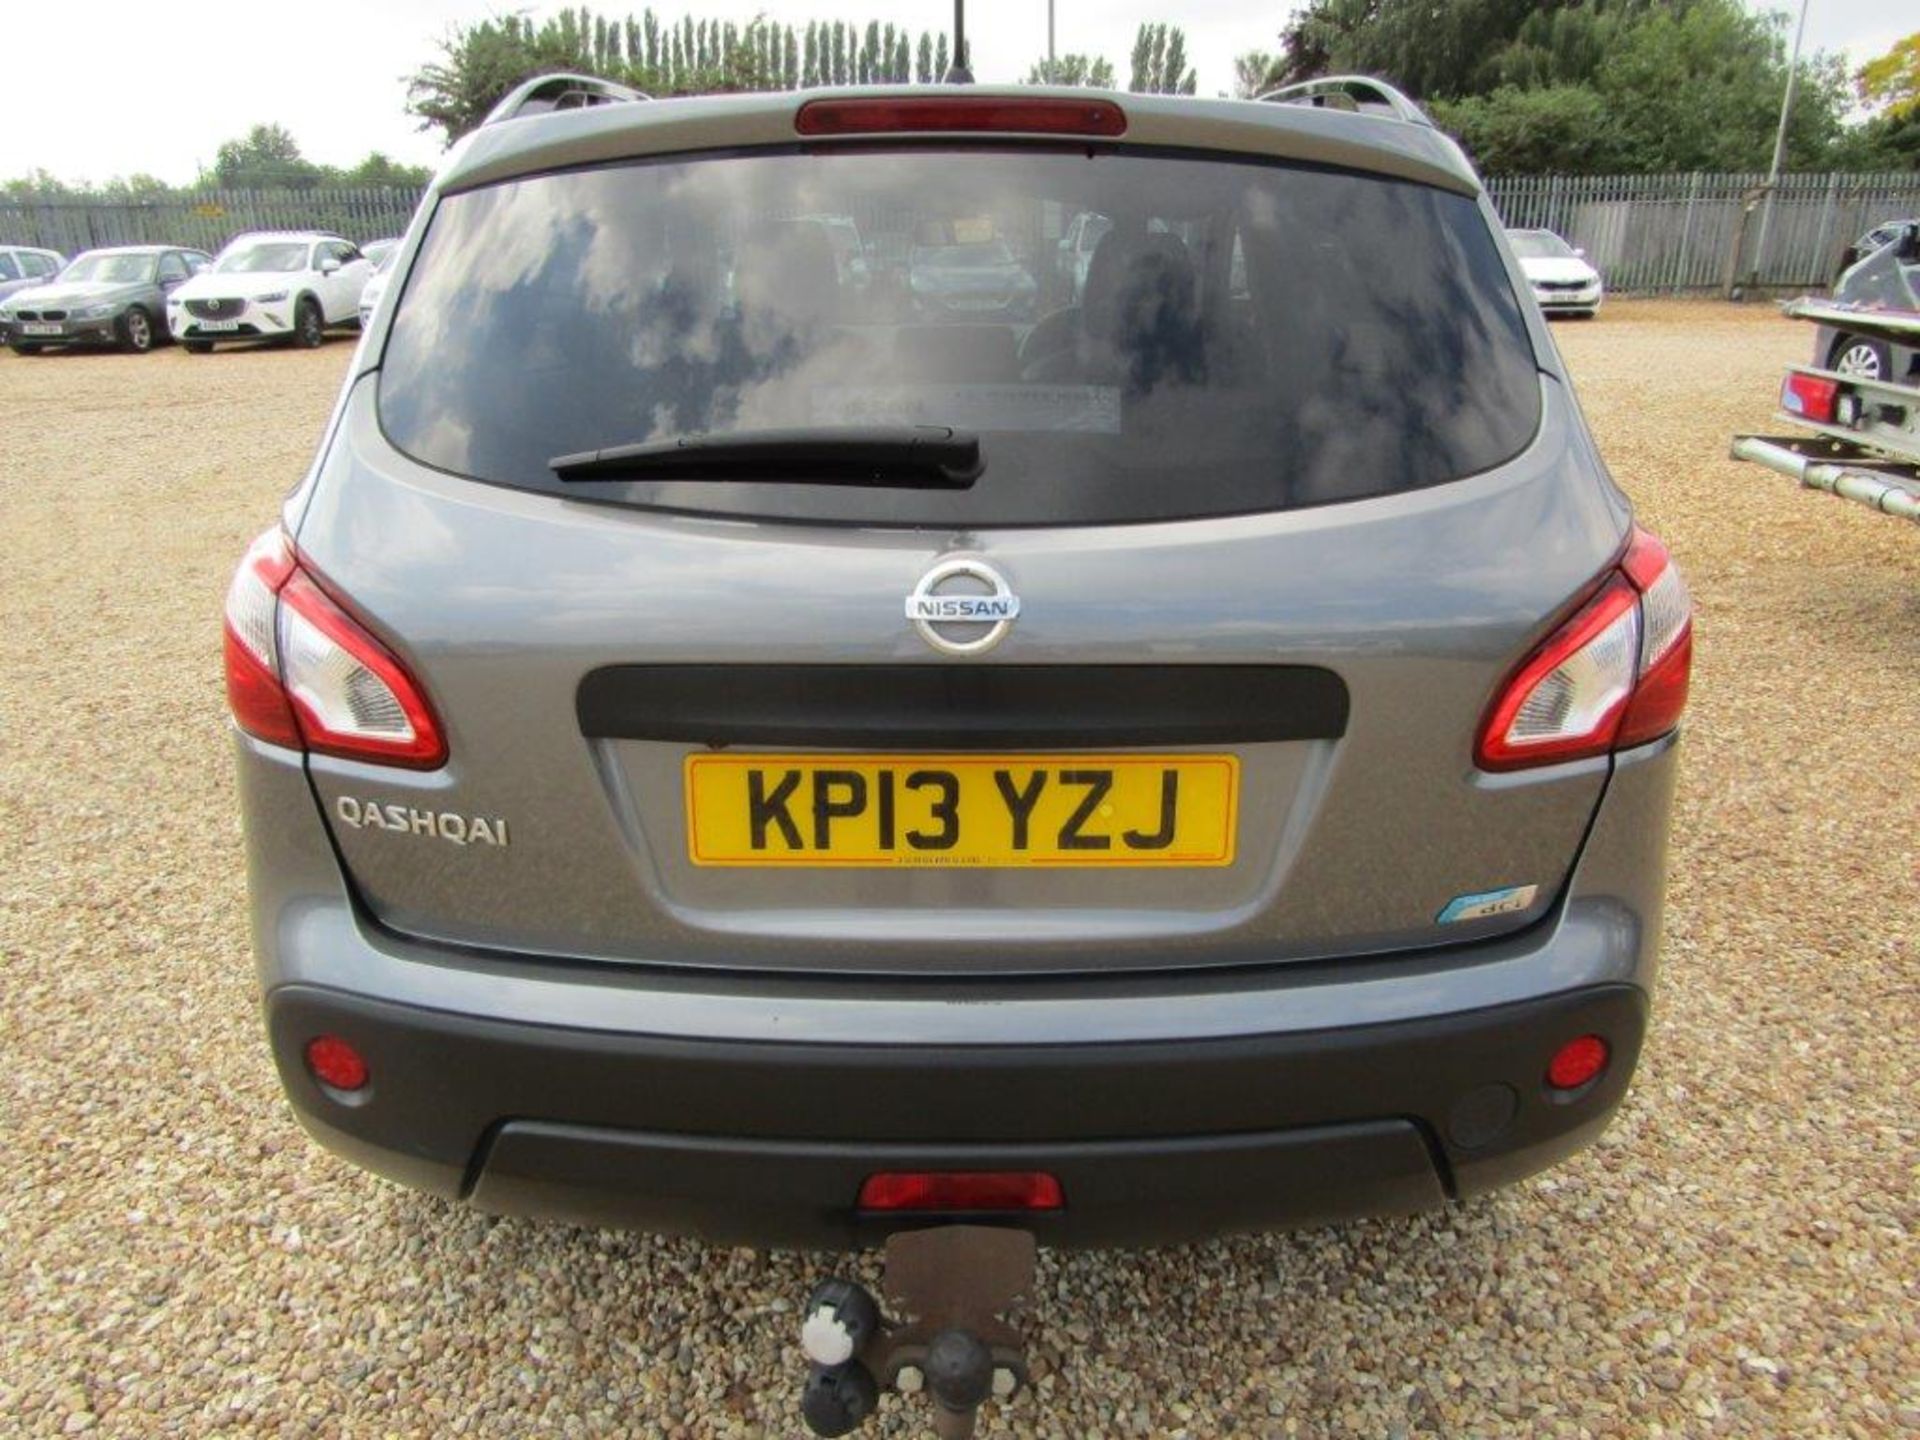 13 13 Nissan Qashqai 360 iS DCi - Image 6 of 27